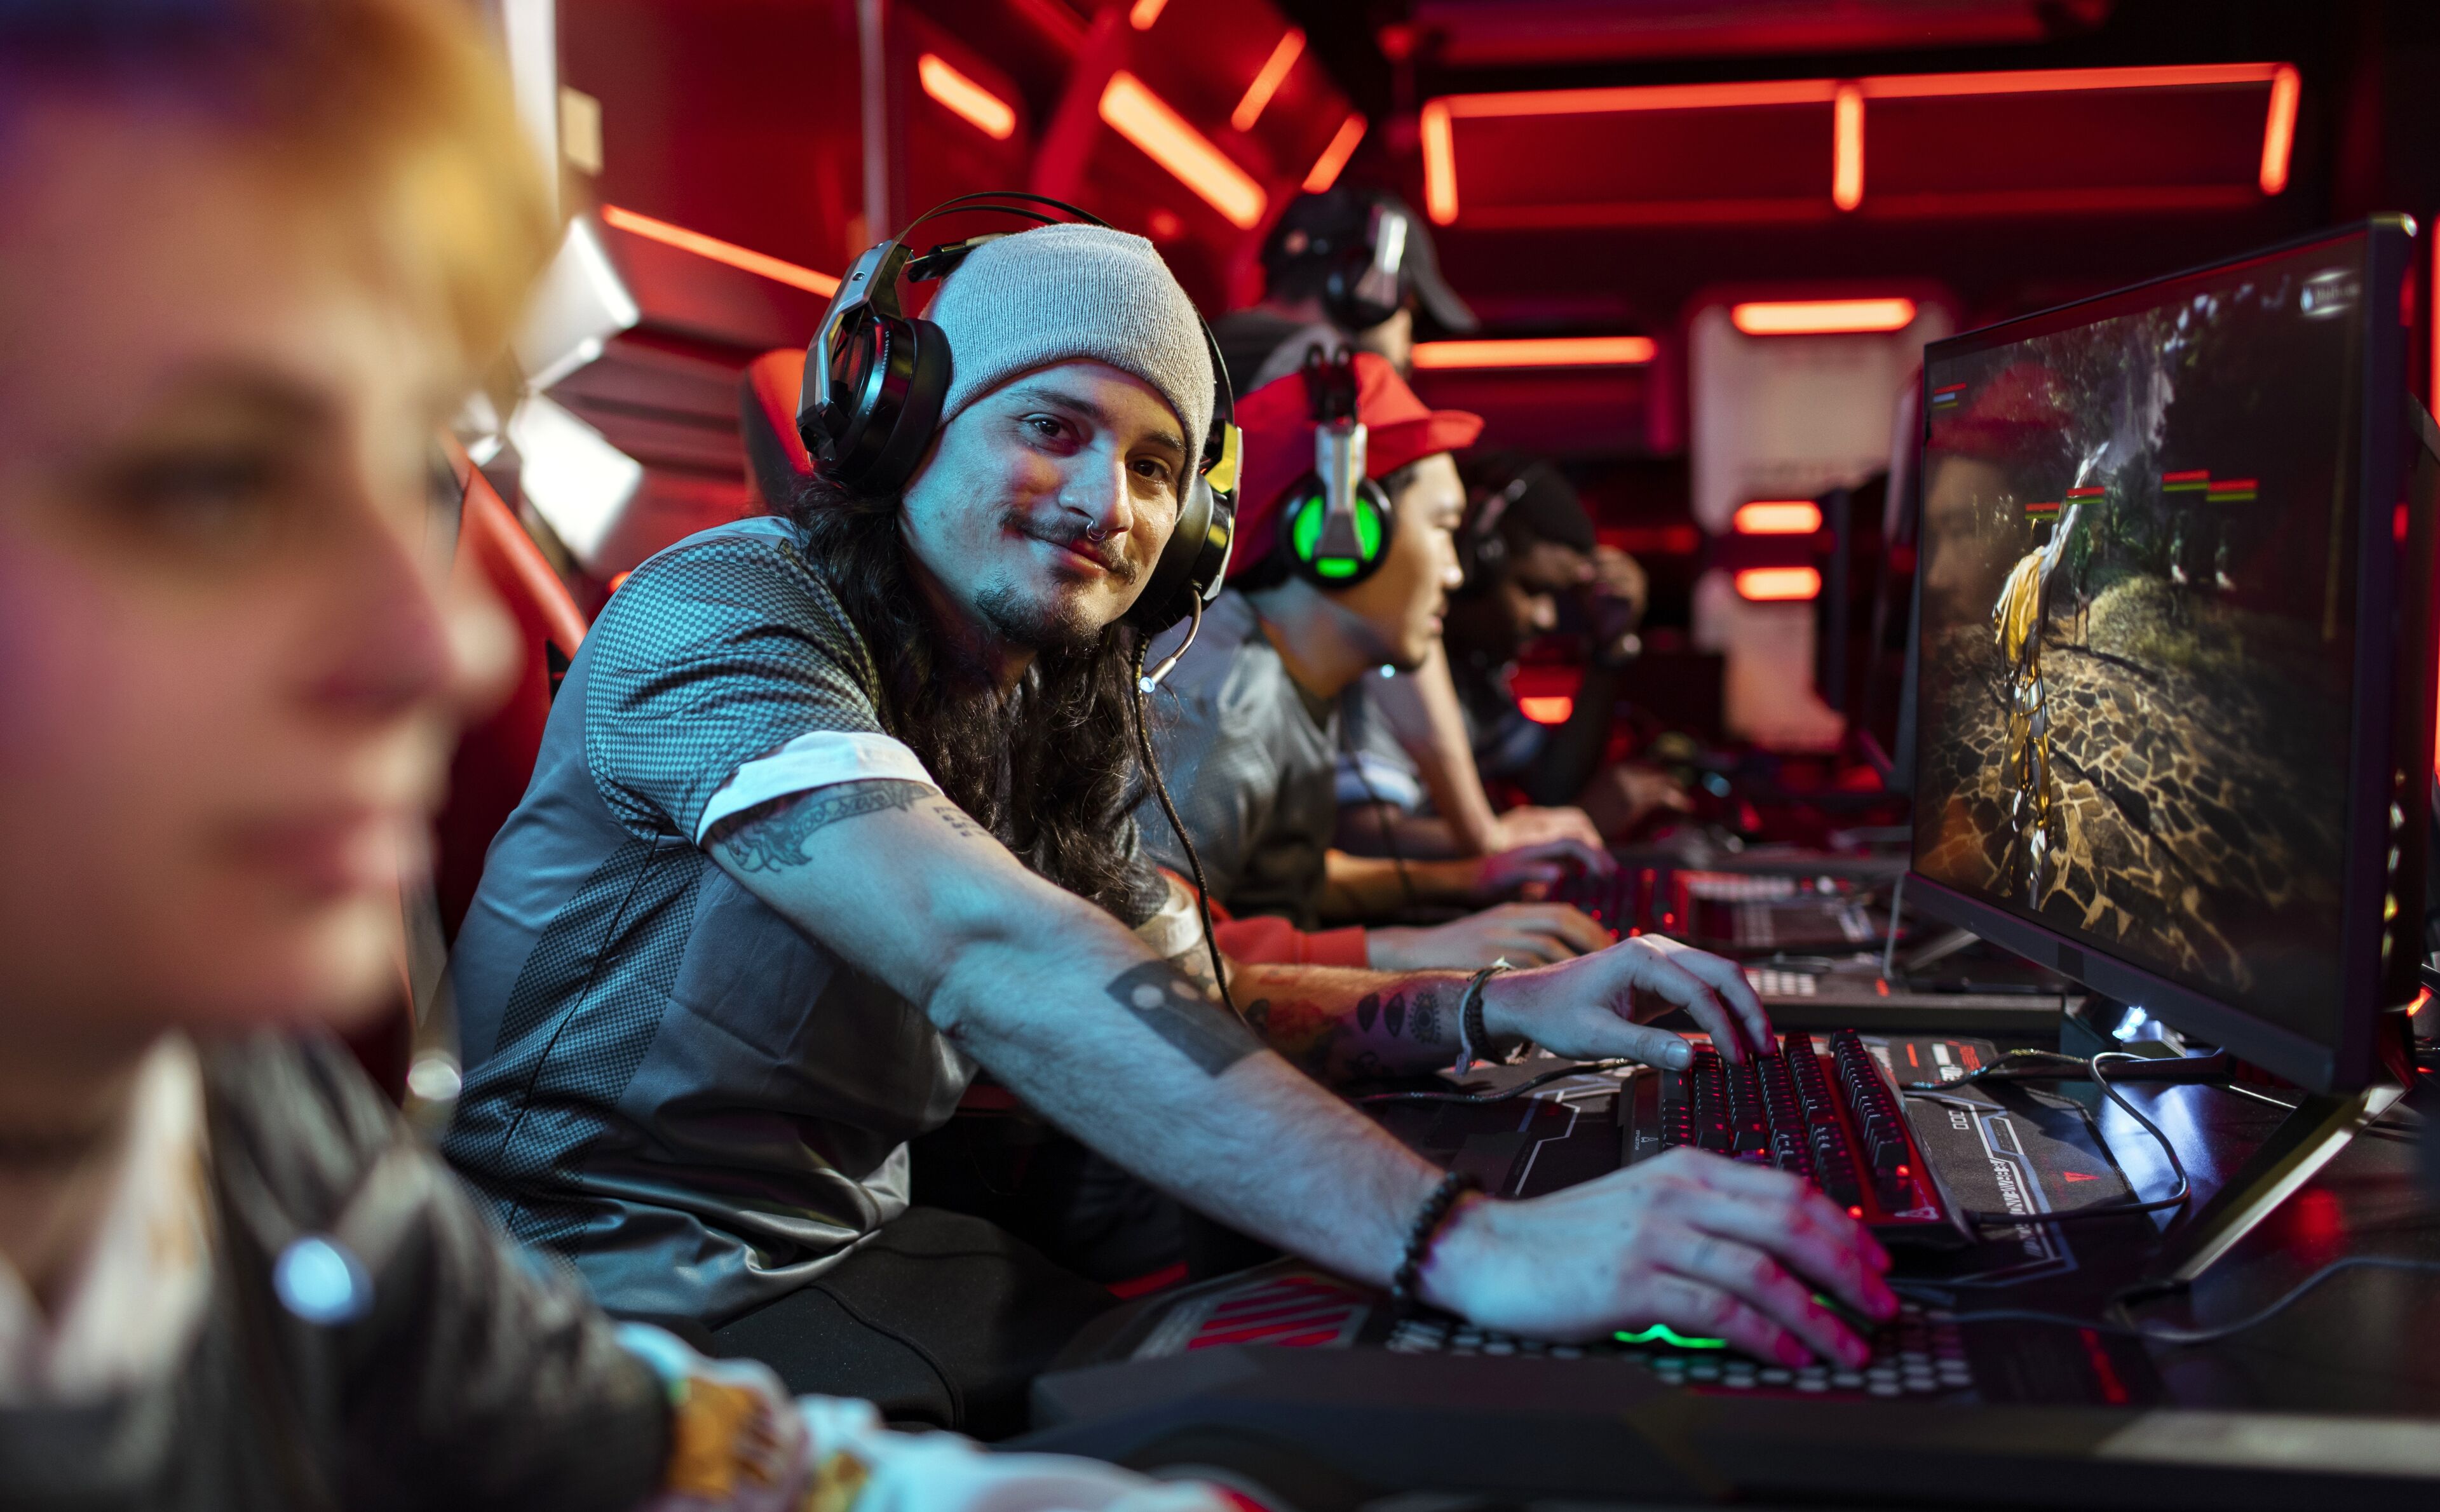 Gamers with headphones intensely focused on competitive video gaming at an esports event with a red neon-lit ambiance.